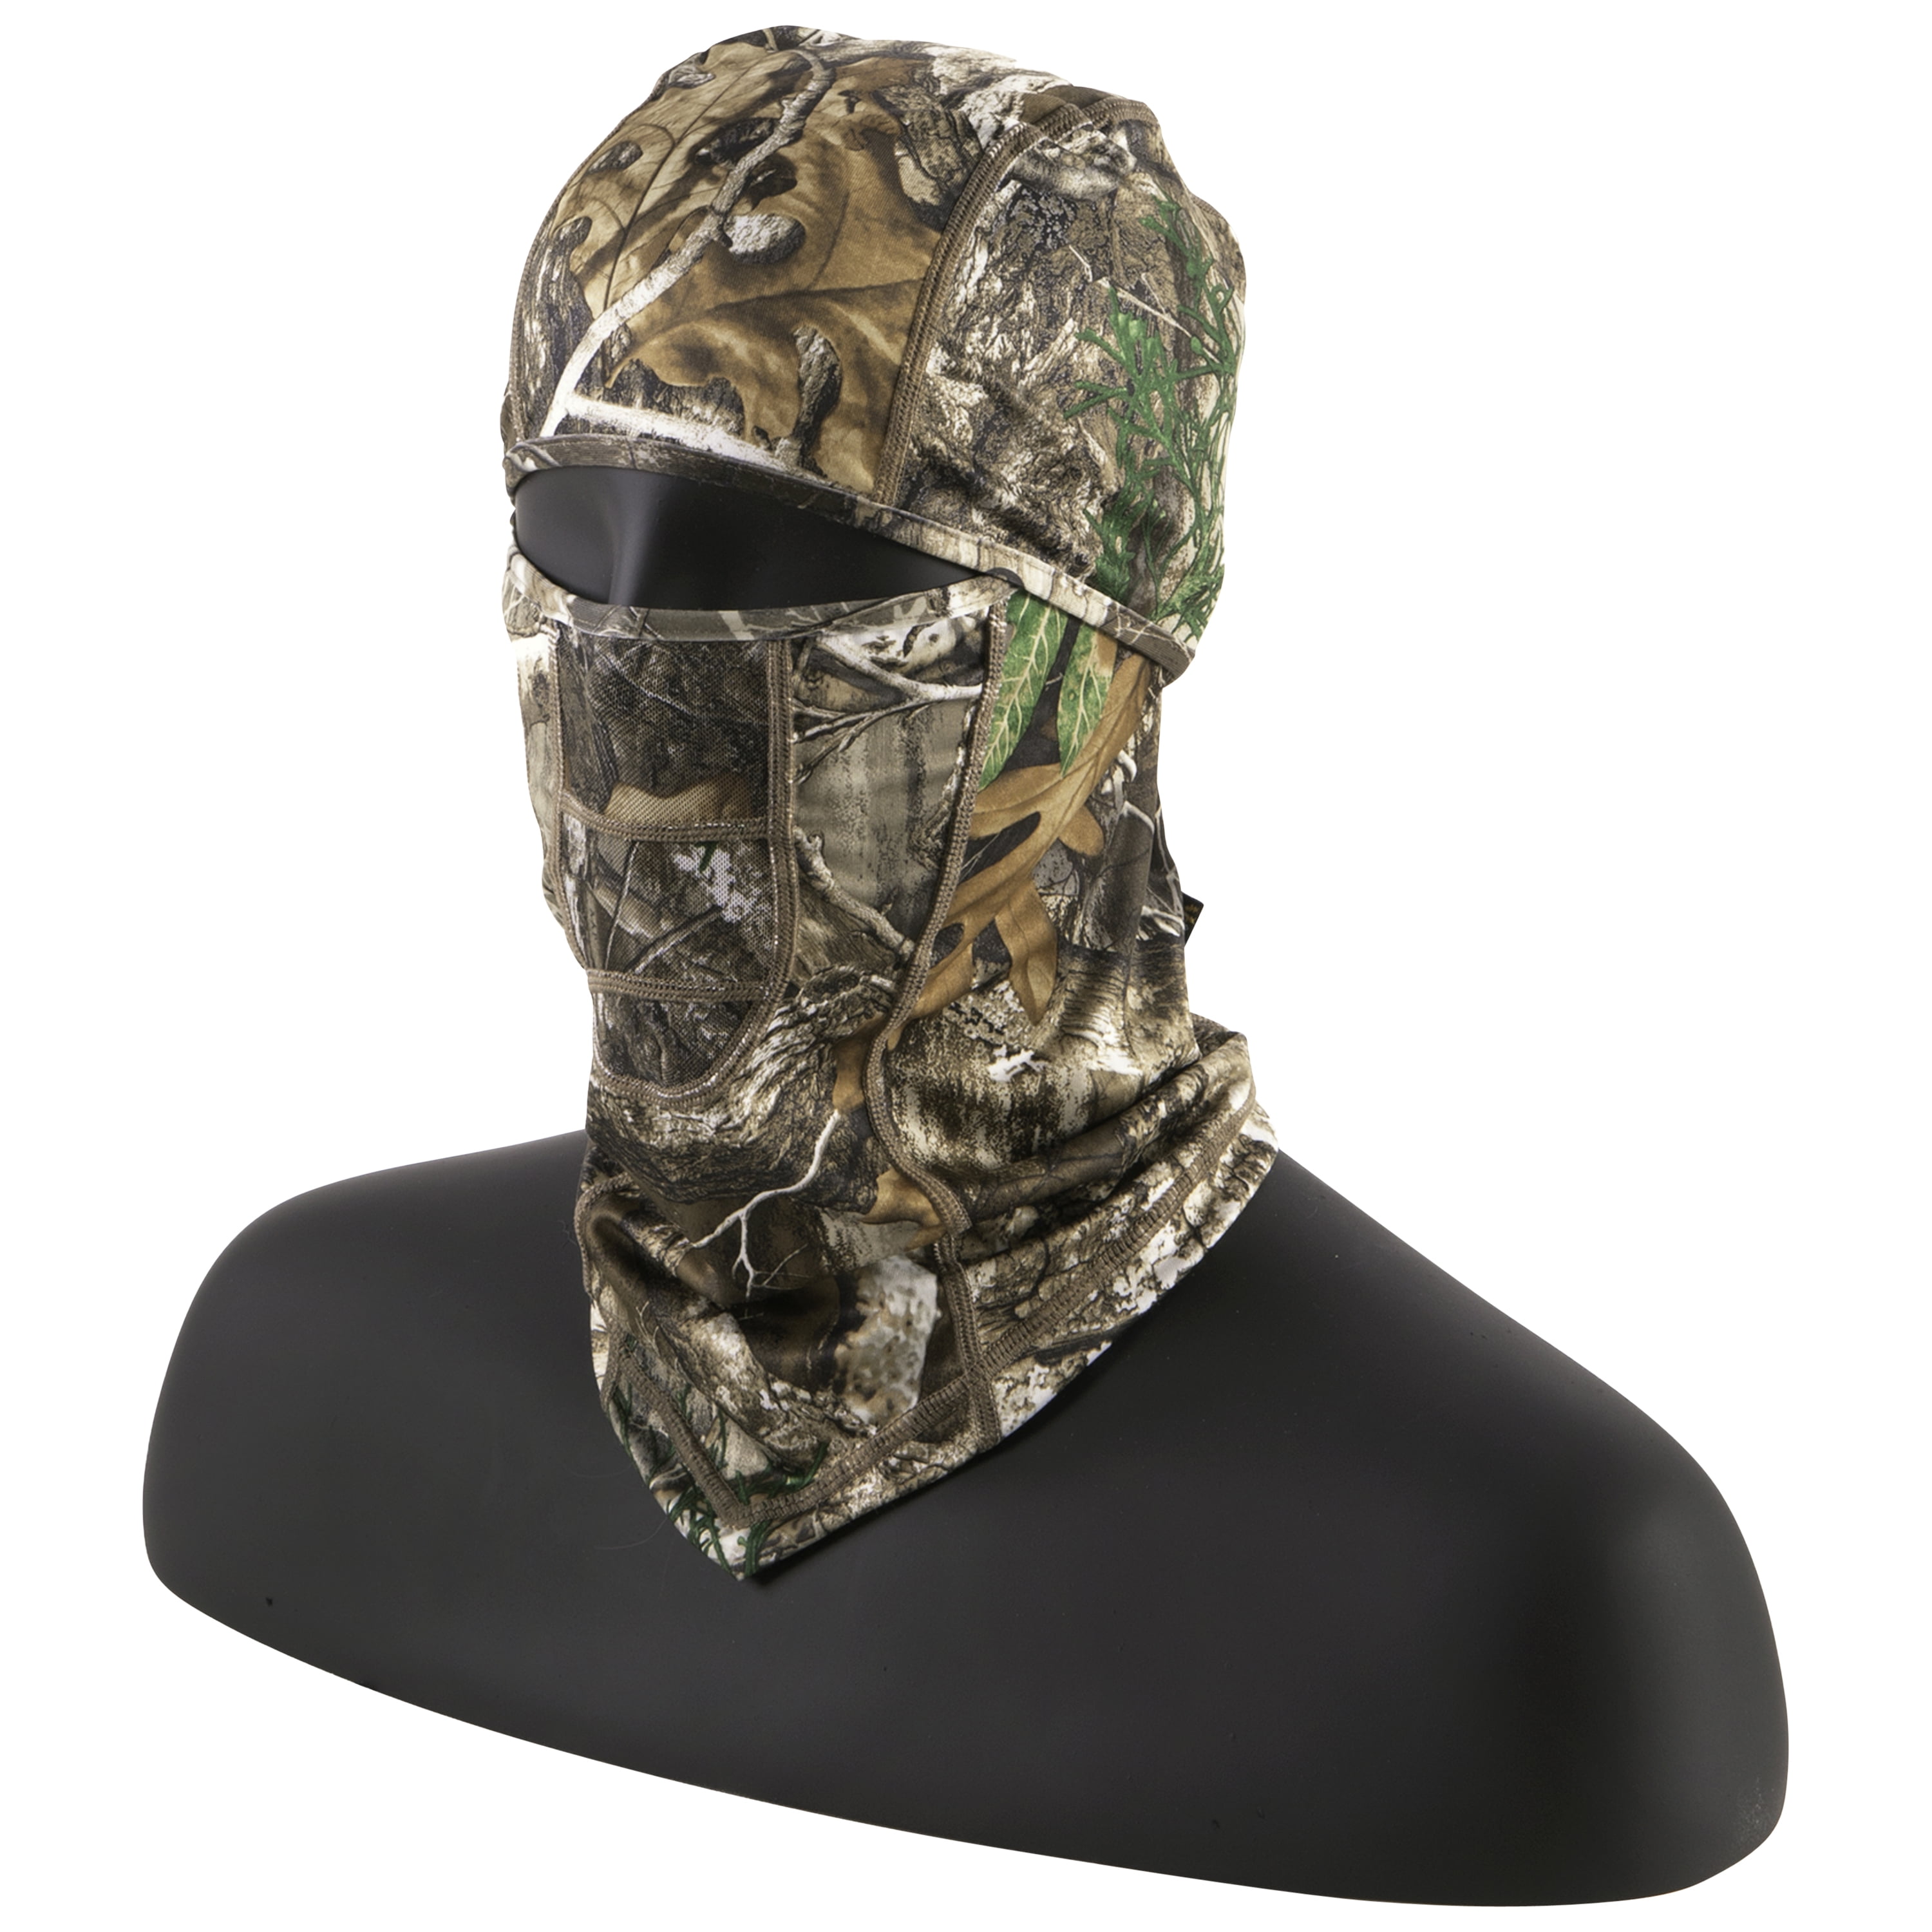 Details about   Camo Army Military Tactical Sniper Hunting Shooting Balaclava Bandana Face Mask 